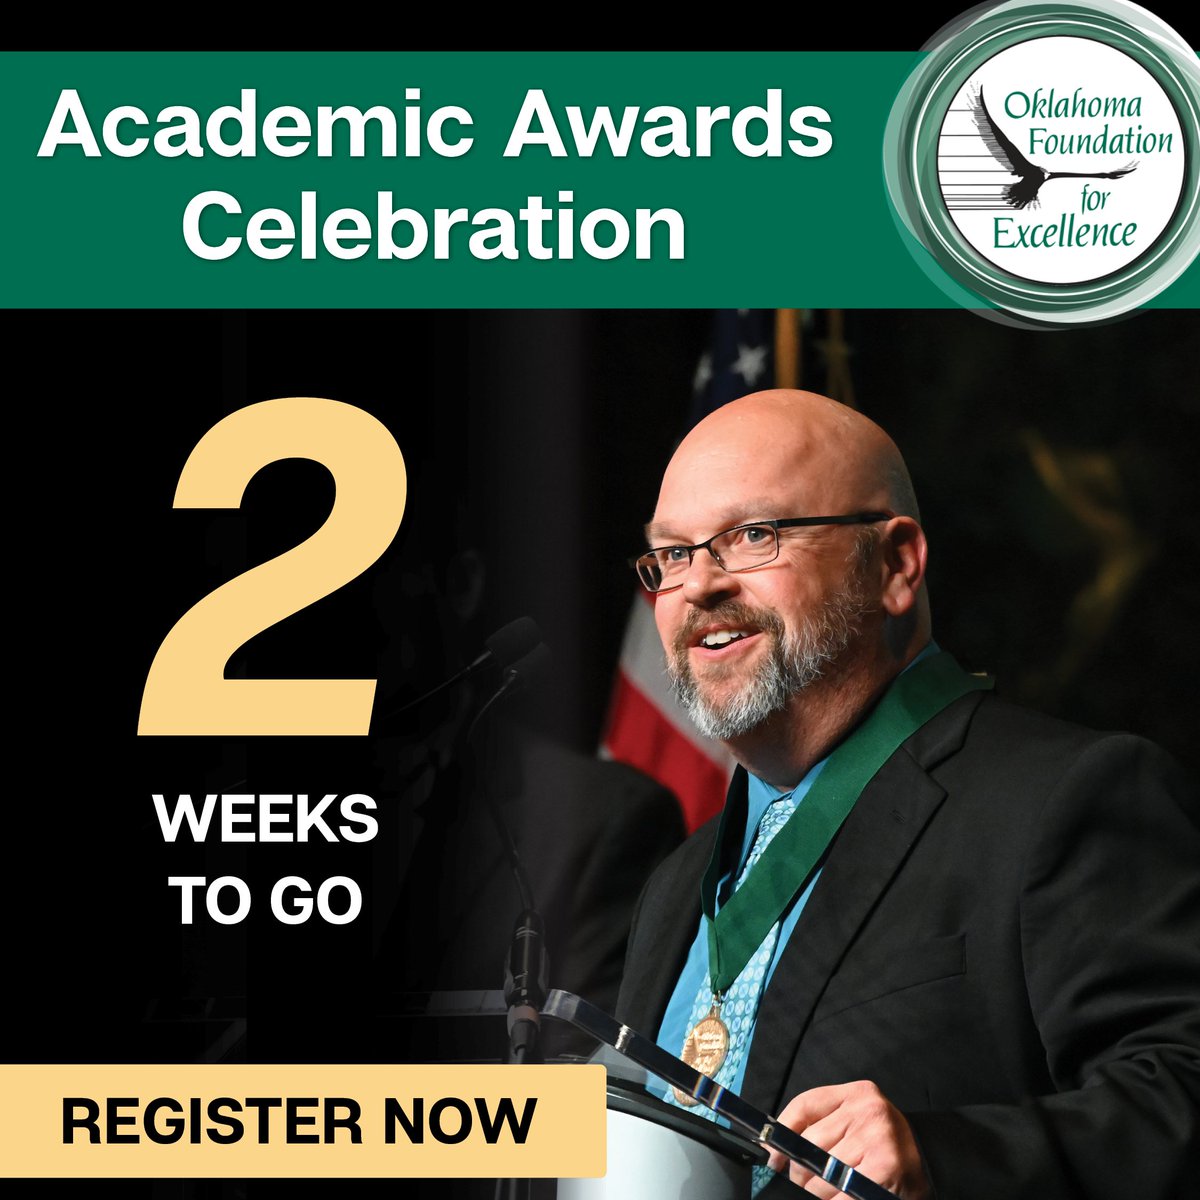 There are just two weeks to go until the Academic Awards Celebration! You don’t want to miss this inspiring event that honors Oklahoma public school foundations, students and educators. Register today at ow.ly/kL5S50Rk5vQ #oklaed #ofeawards